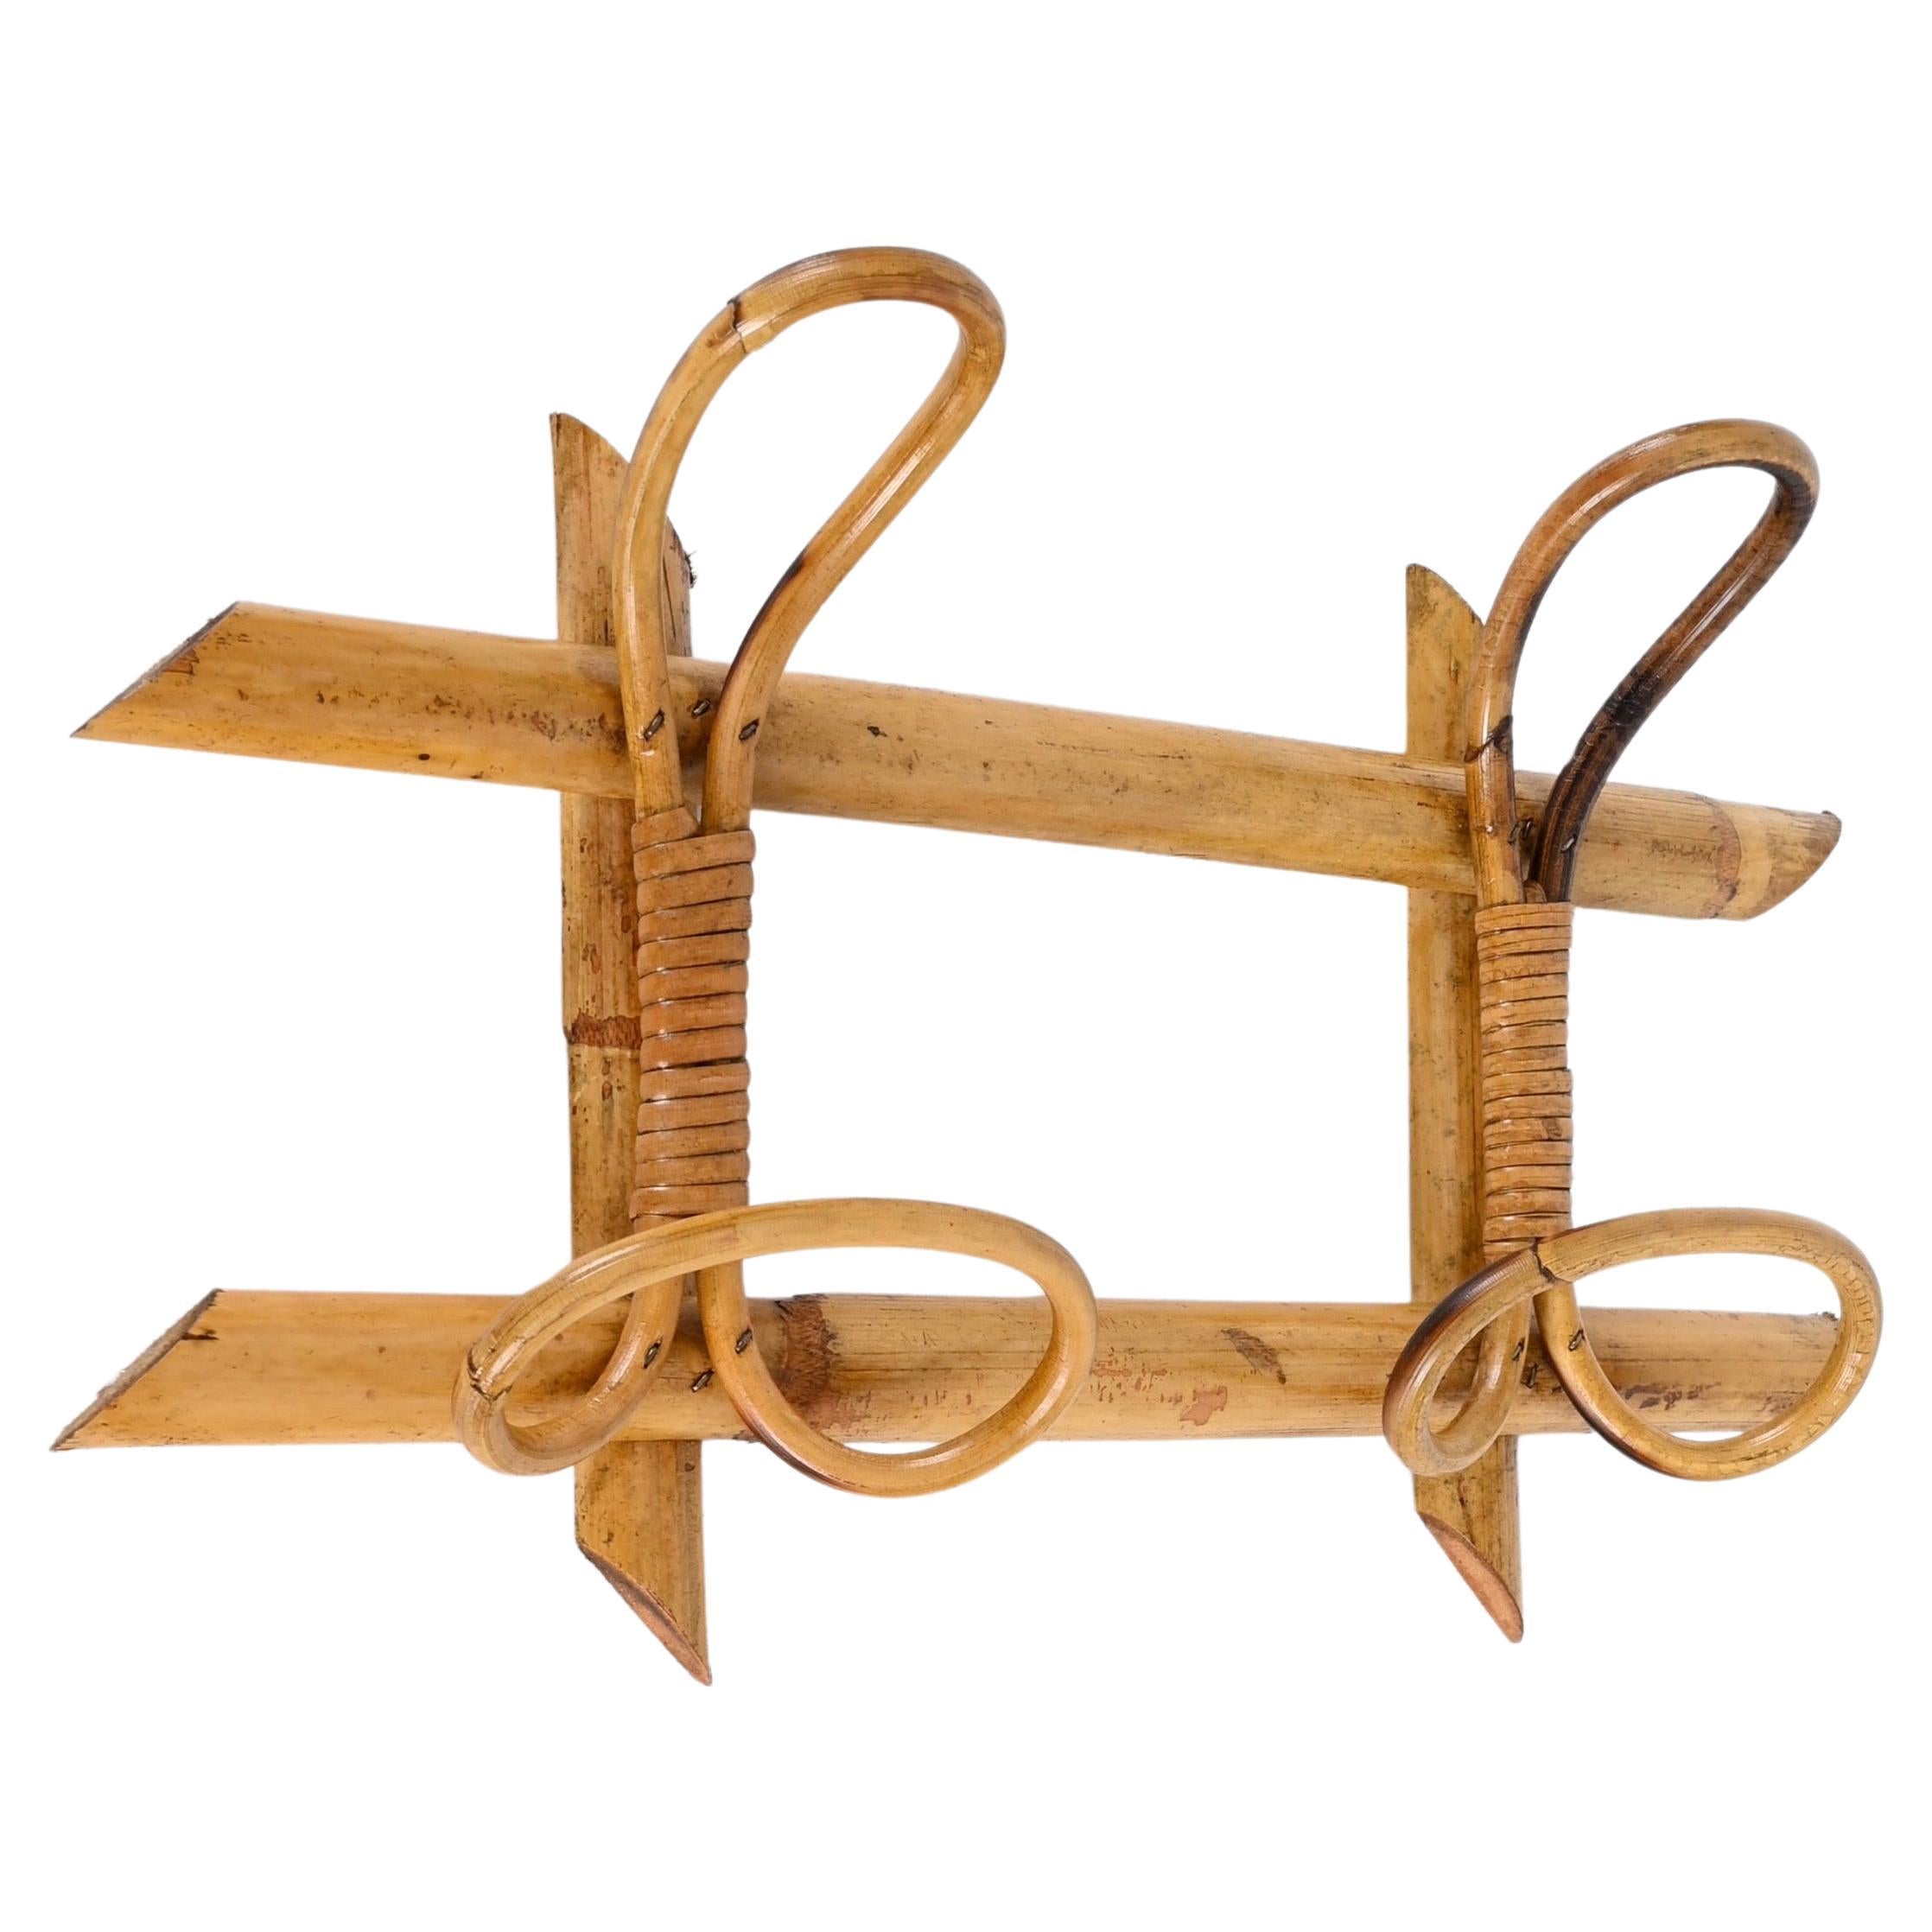 Midcentury French Riviera Coat Rack in Rattan, Wicker and Bamboo, Italy 1960s For Sale